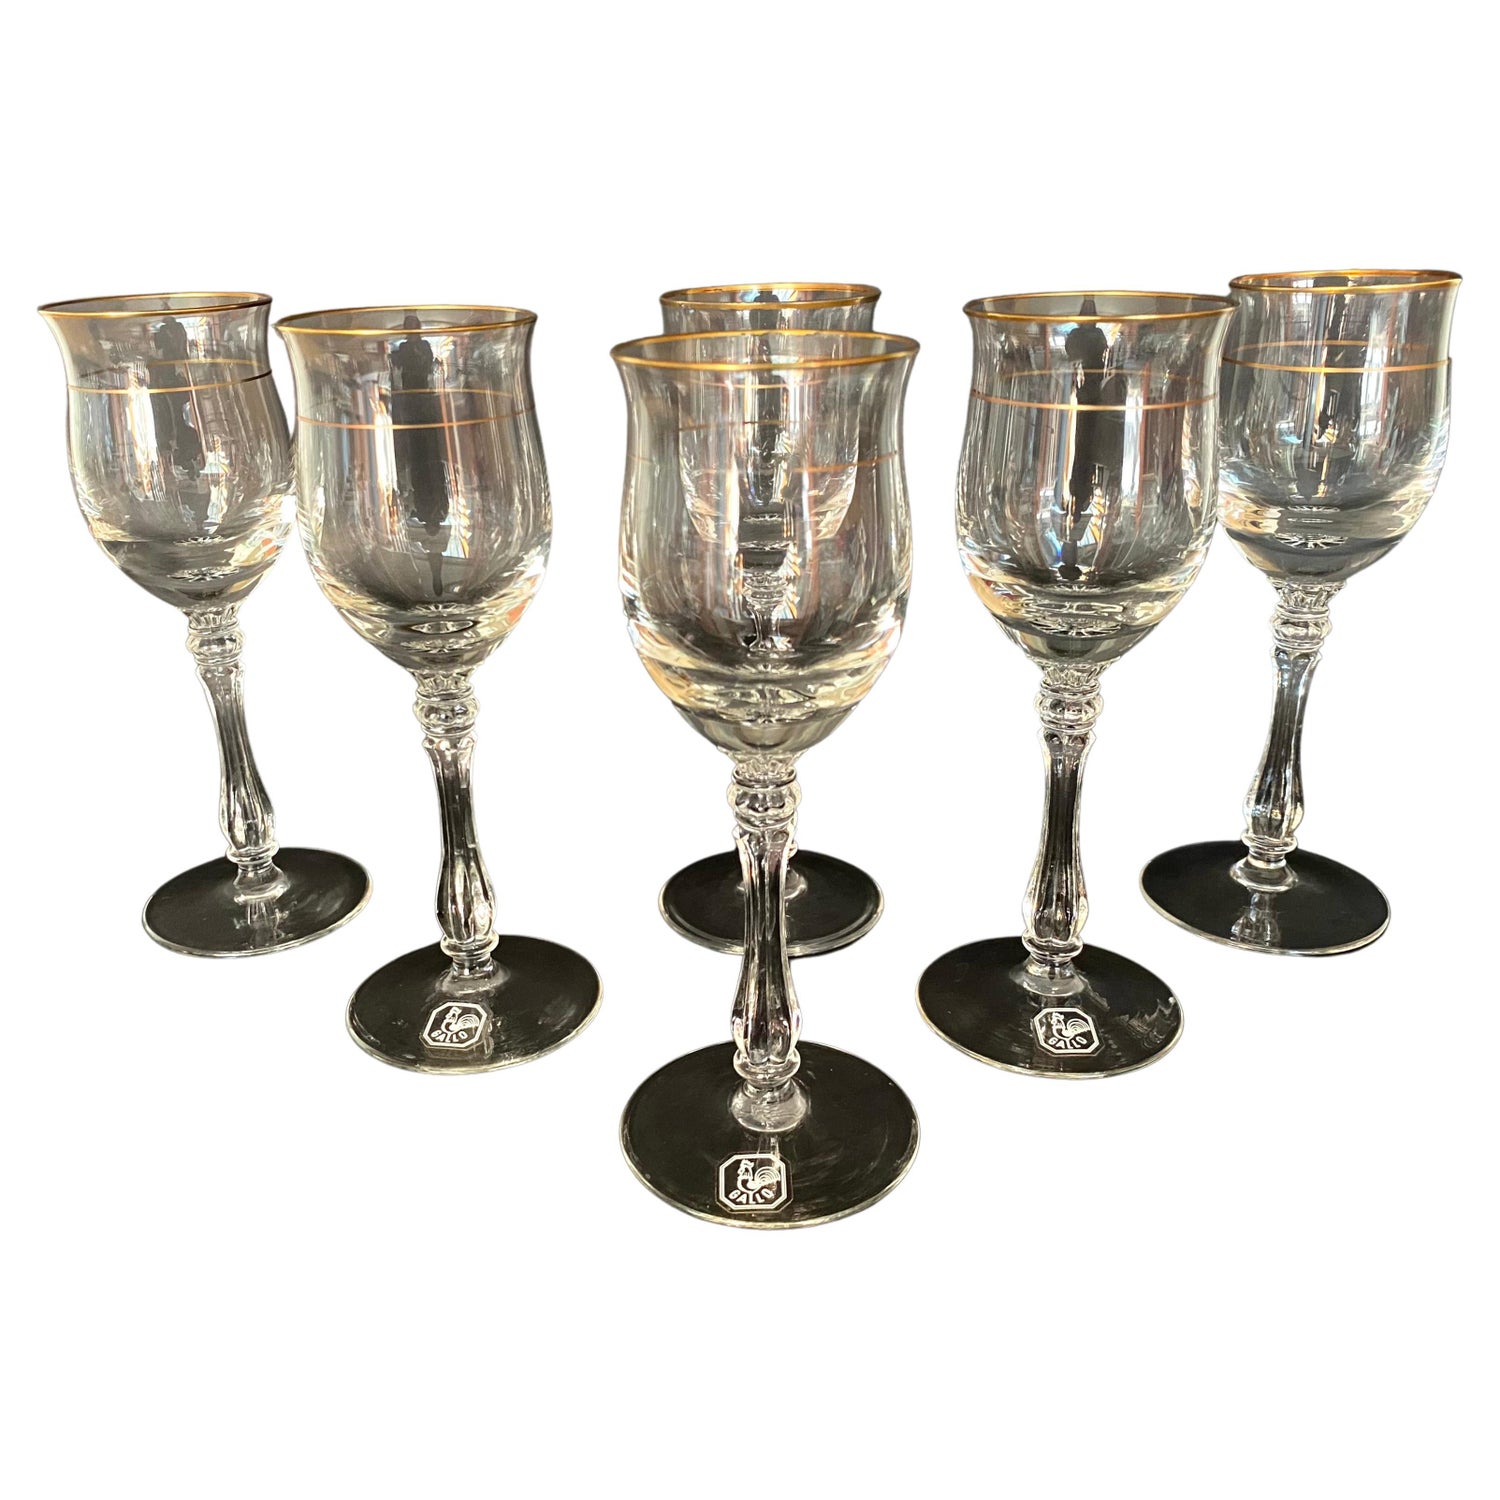 Vintage Crystal Wine Glasses by Gallo, 1980, Set of 8